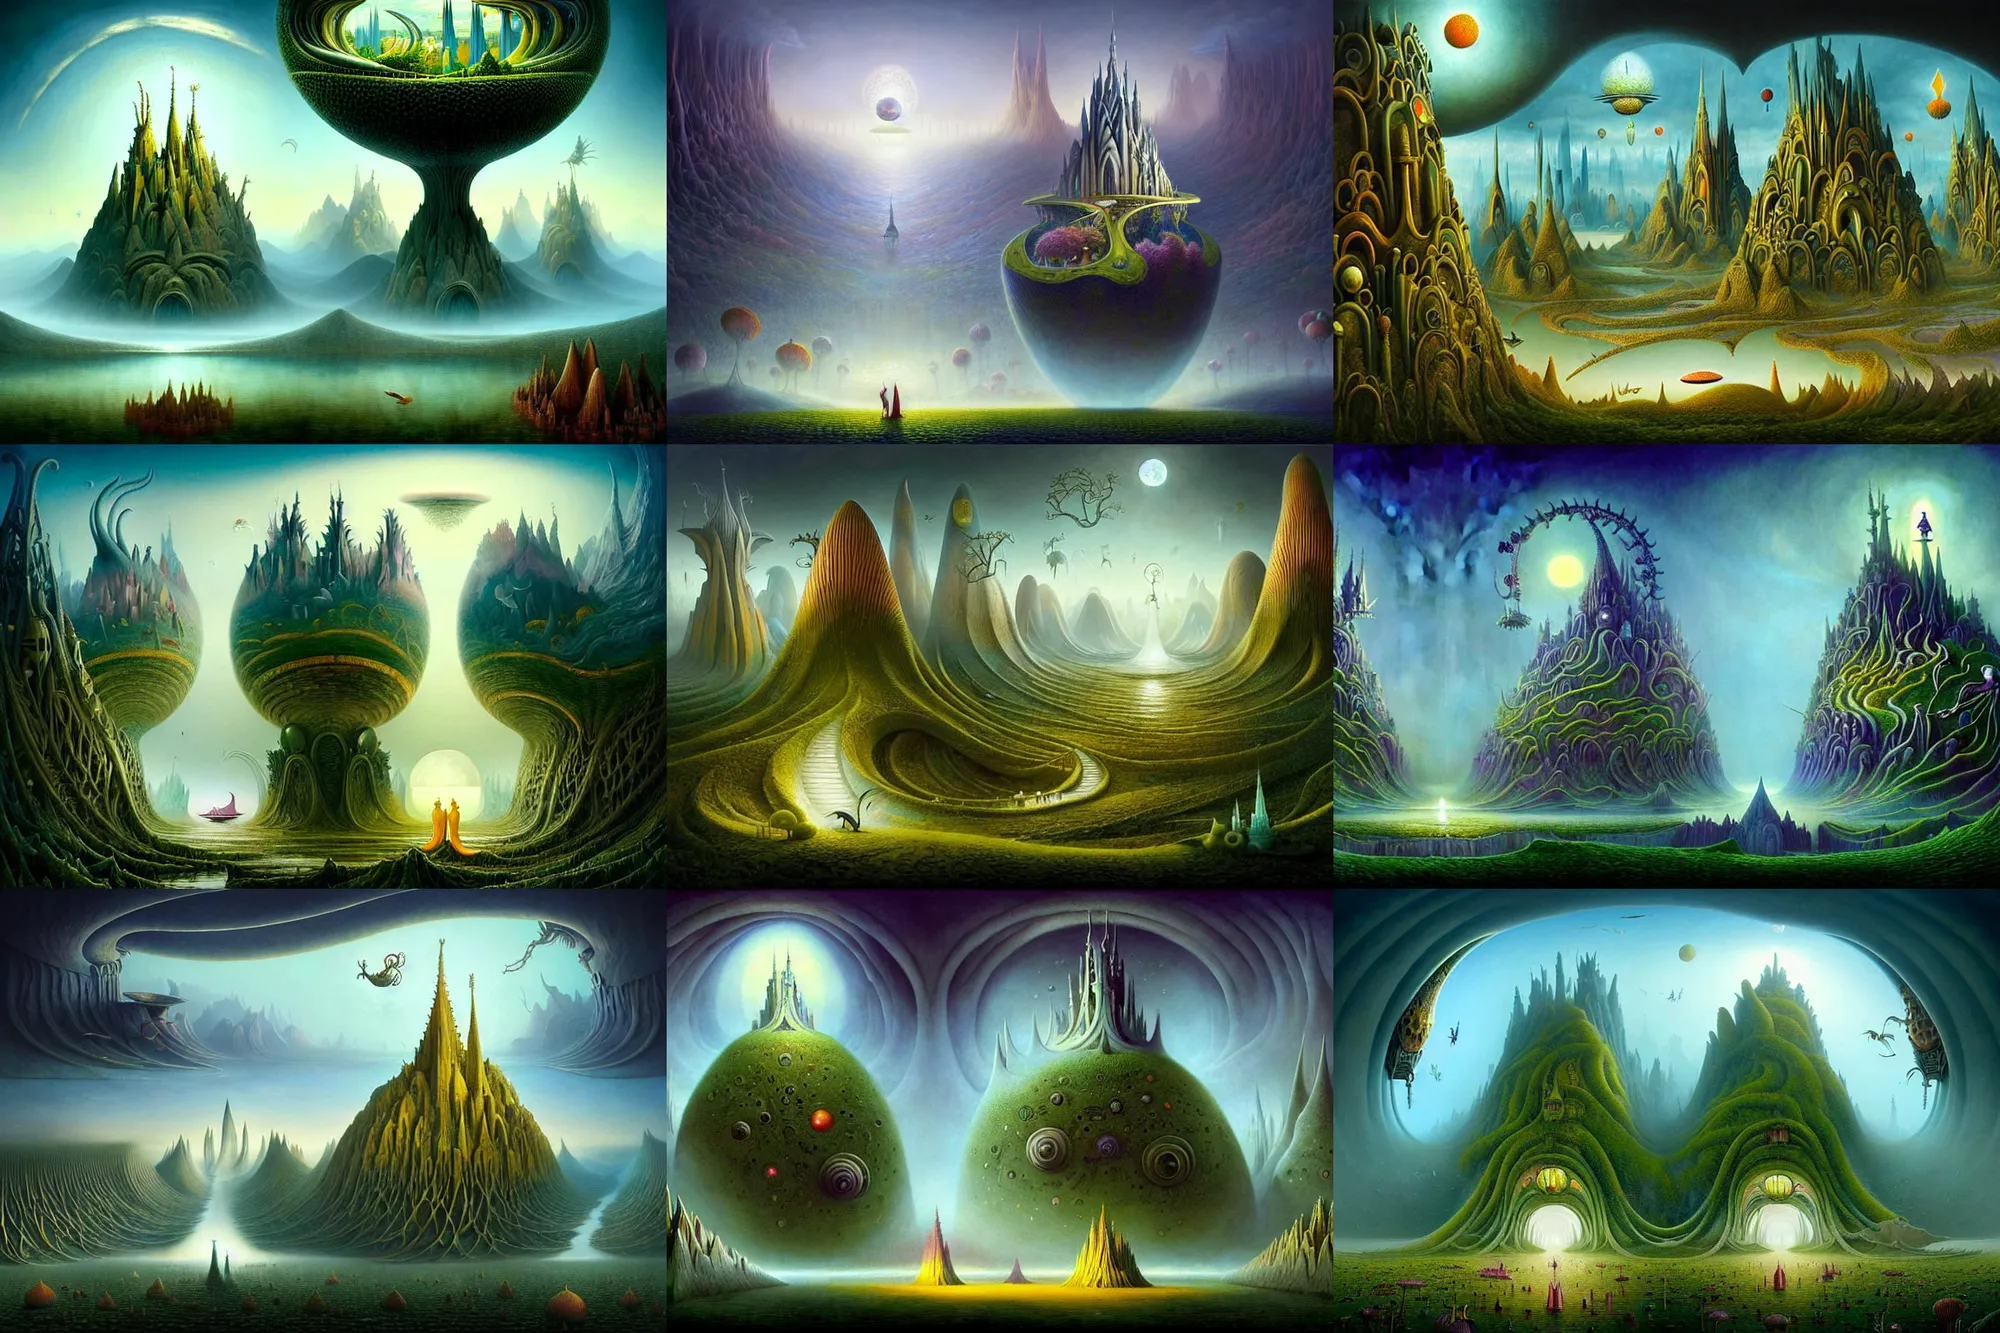 Prompt: a beguiling epic stunning beautiful and insanely detailed matte painting of alien dream worlds with surreal architecture designed by Heironymous Bosch, mega structures inspired by Heironymous Bosch's Garden of Earthly Delights, vast surreal landscape and horizon by Andrew Ferez and Cyril Rolando and Oh Ji Hoon, masterpiece!!, grand!, imaginative!!!, whimsical!!, epic scale, intricate details, sense of awe, elite, wonder, insanely complex, masterful composition, sharp focus, fantasy realism, dramatic lighting